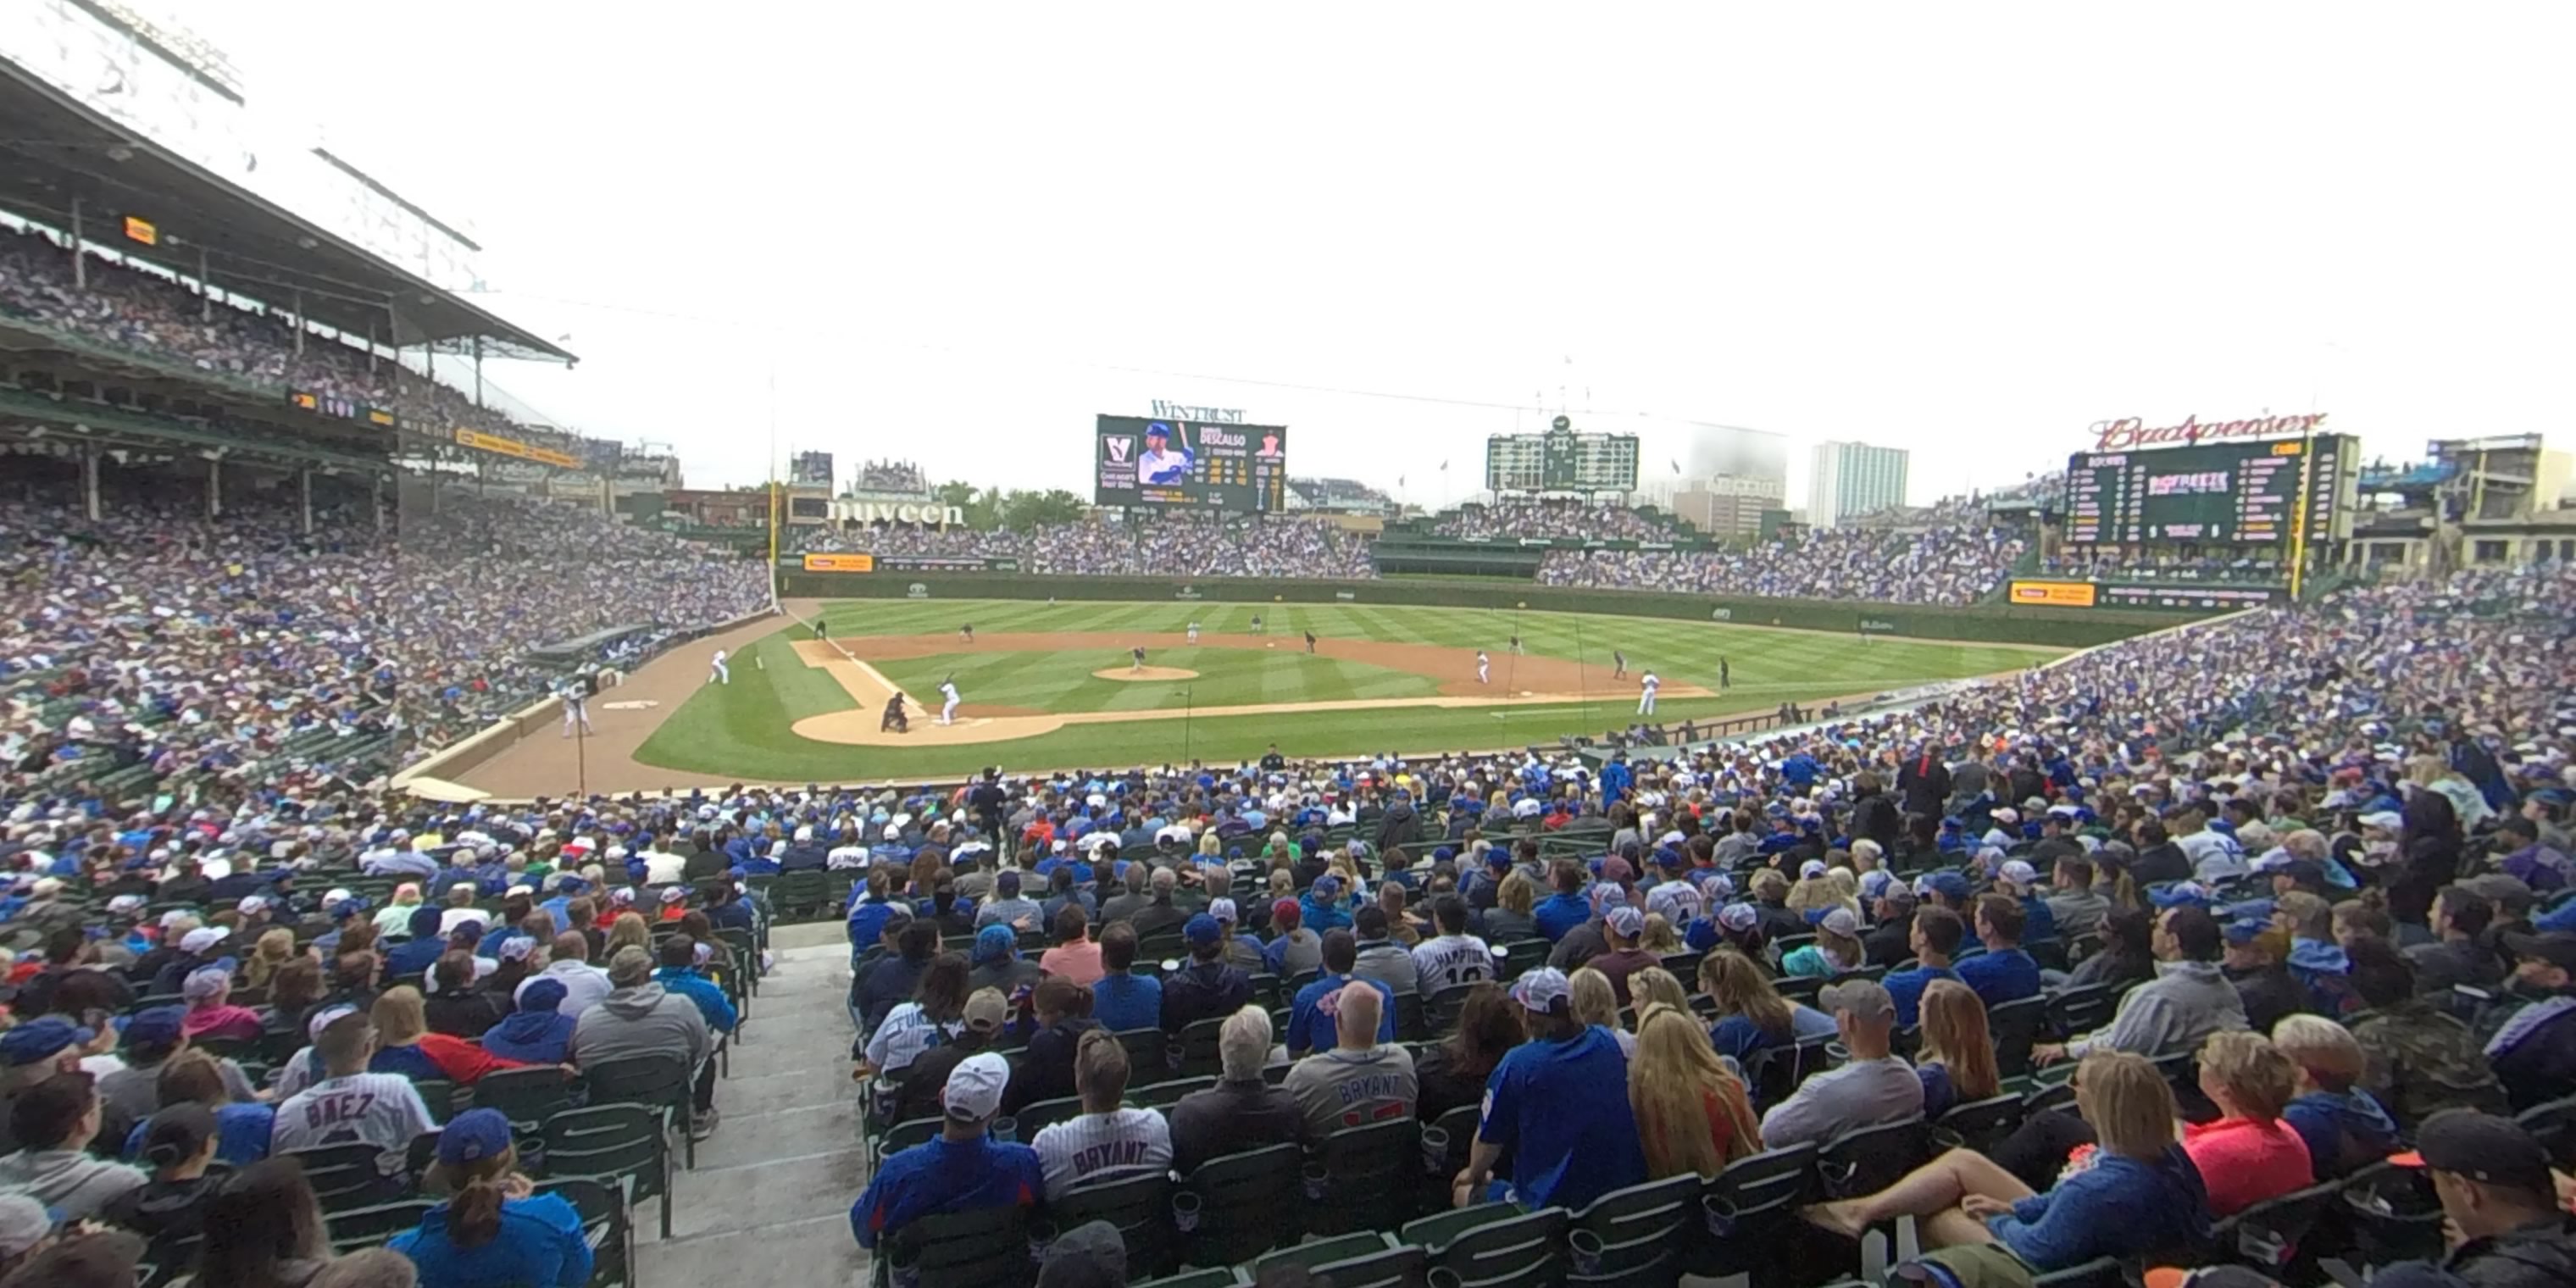 section 120 panoramic seat view  for baseball - wrigley field